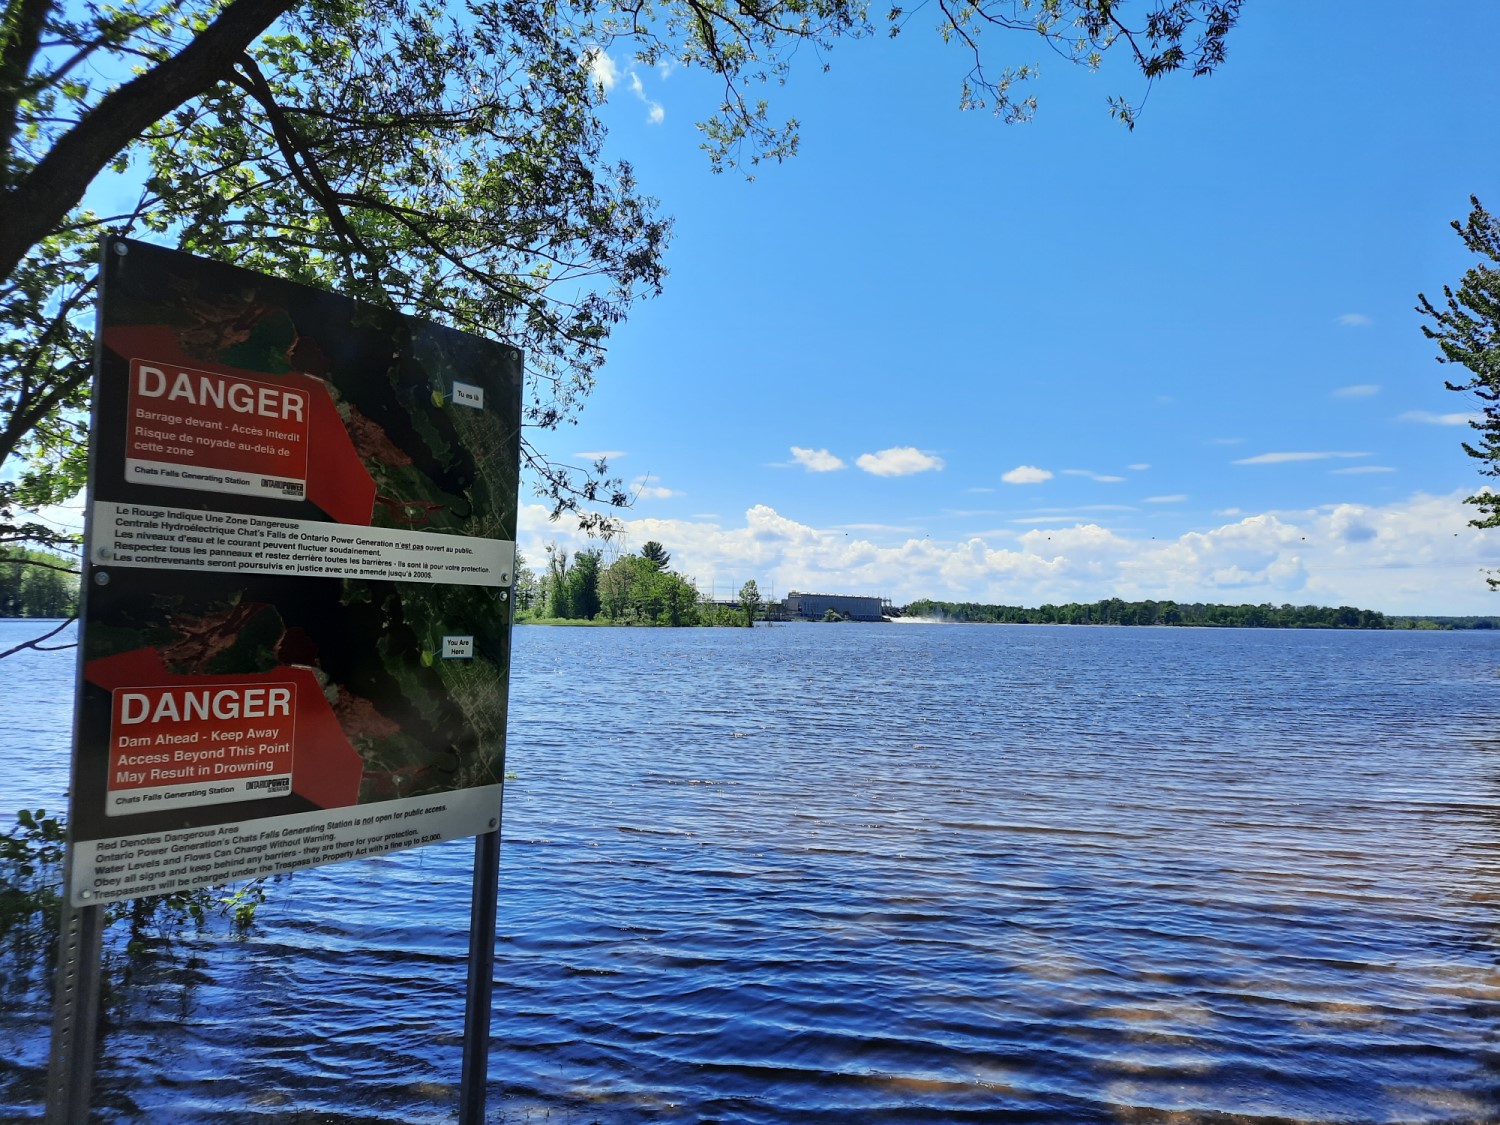 Warning signs posted on the edge of a lake